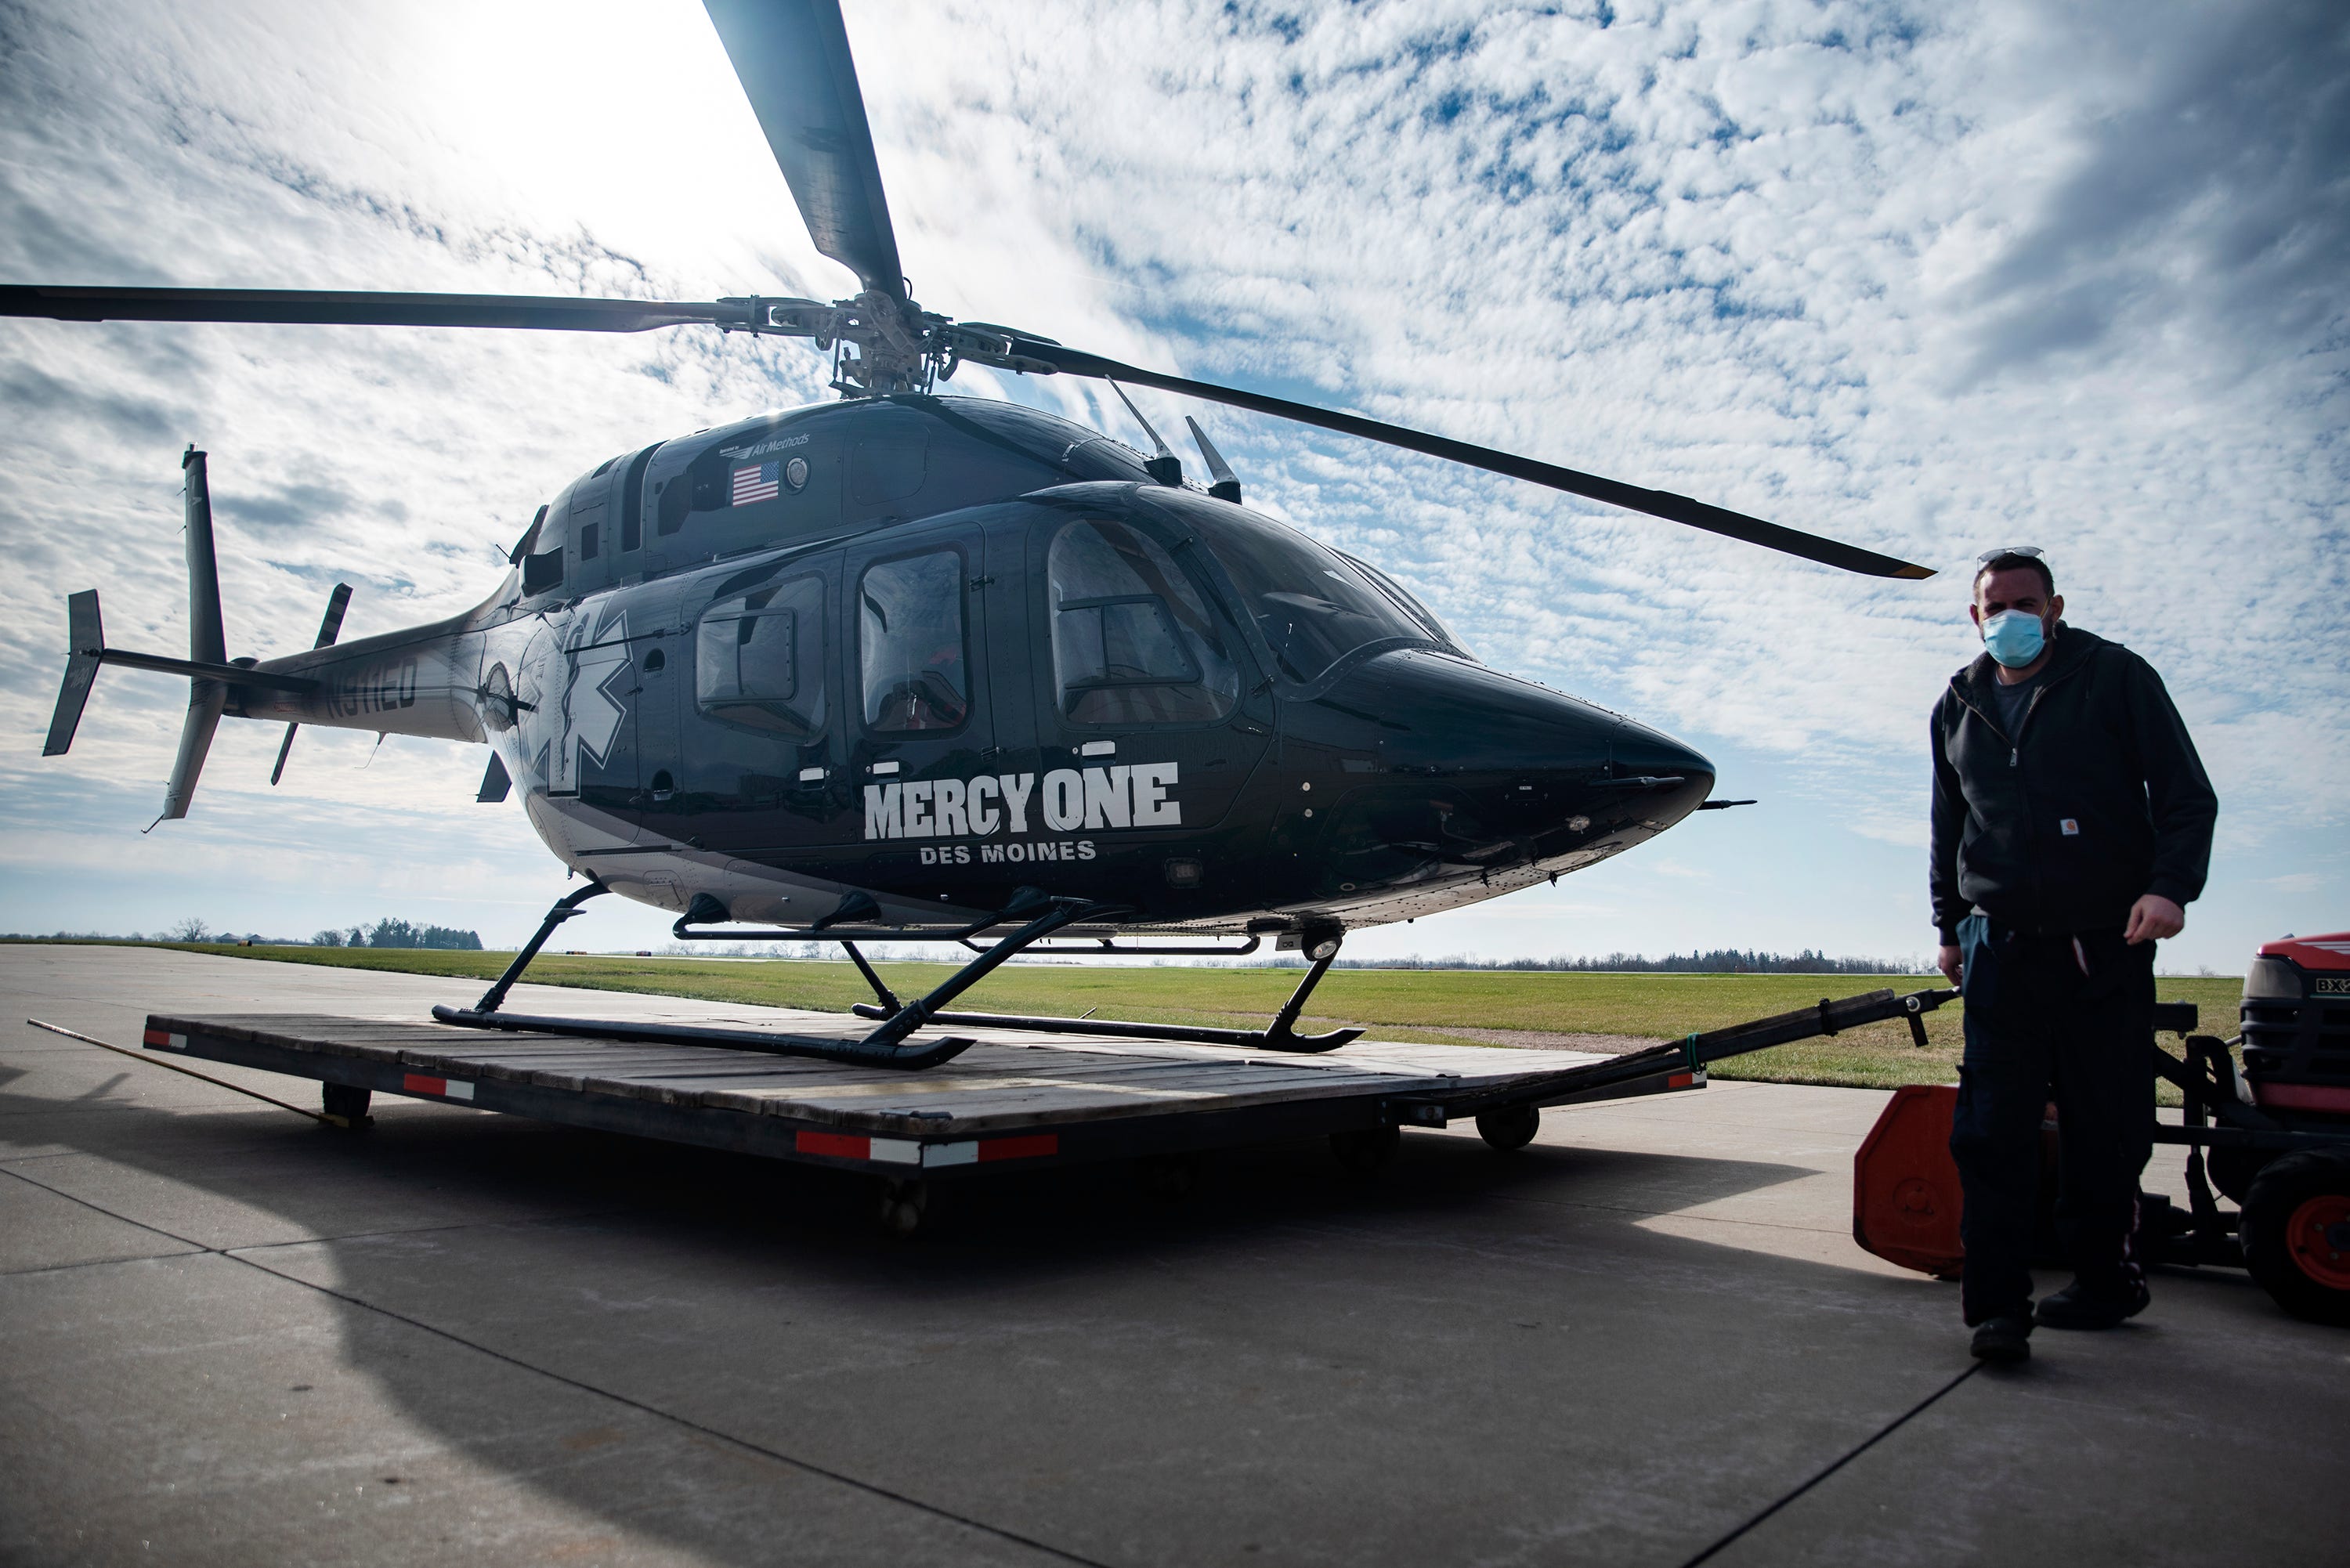 A MercyOne air ambulance unit is seen on Nov. 20, 2020, in Knoxville. Air ambulance use increased sharply as COVID-19 hospitalizations soared in October and November.